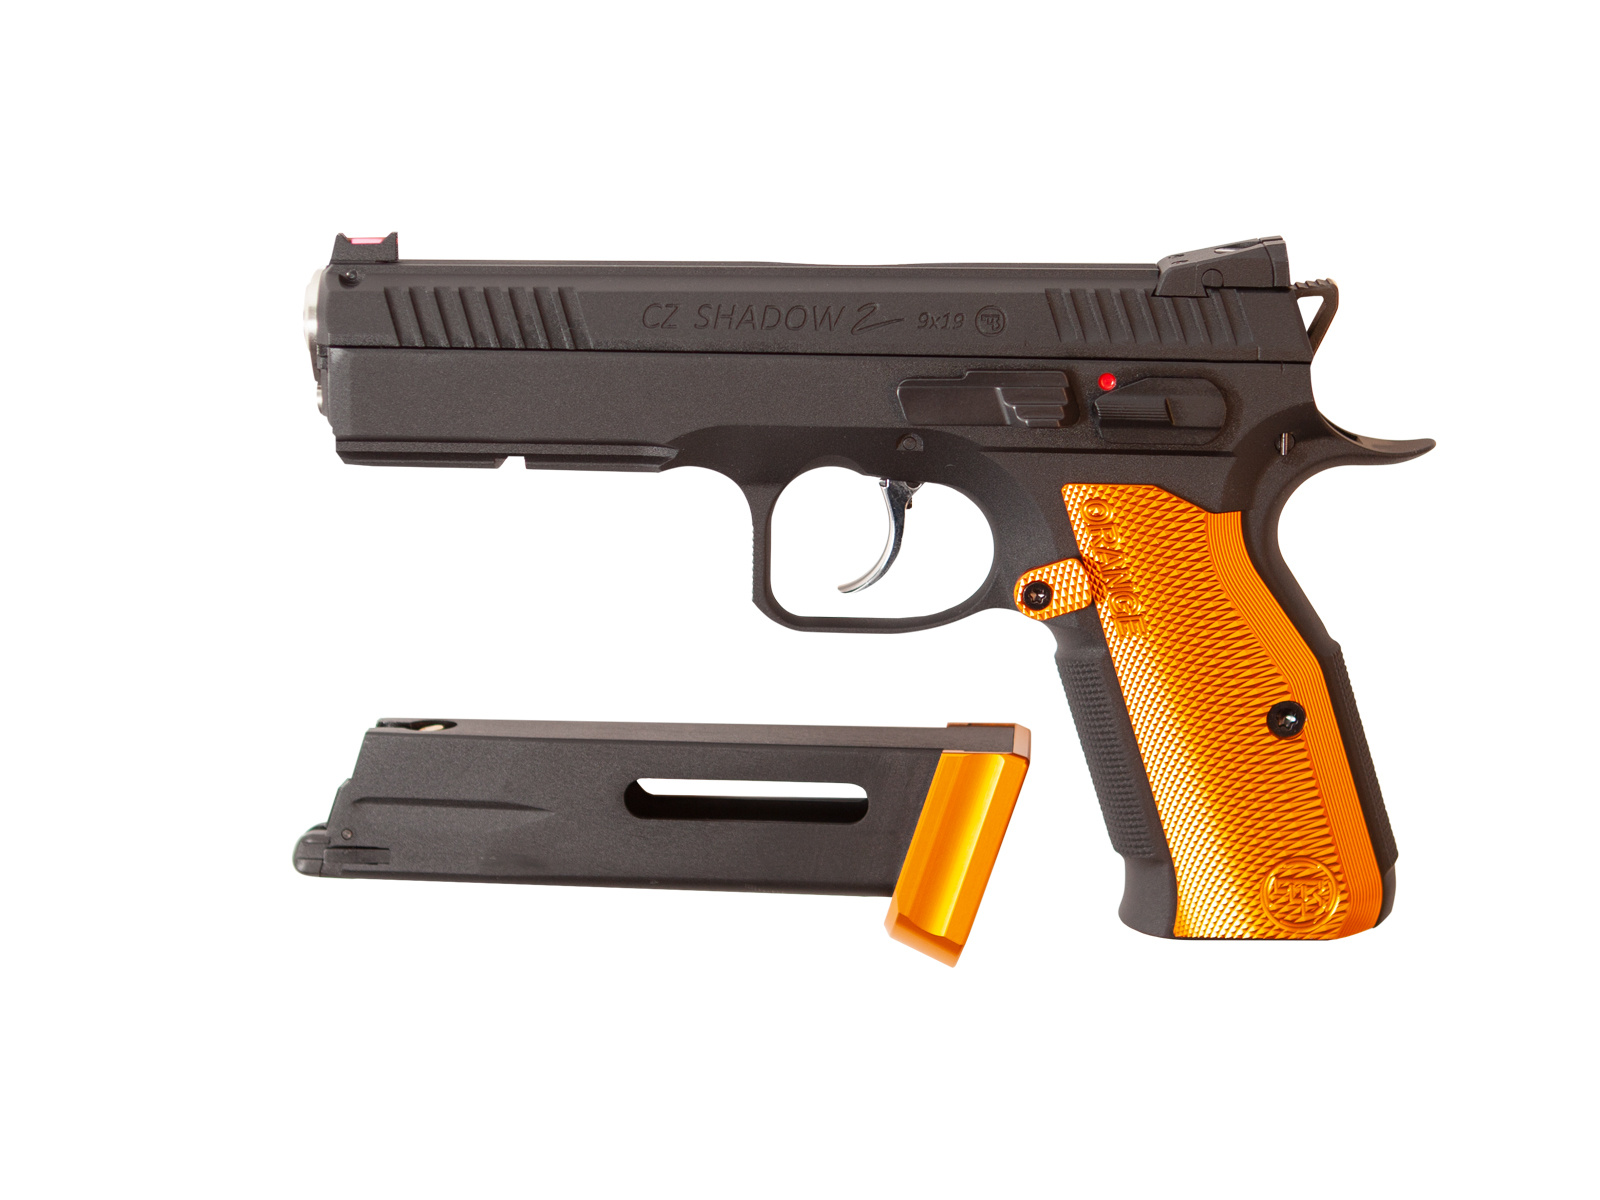 ASG ASG CZ 75 Shadow 2 Co2 GBB 1,0 Joule - Orange Special Edition